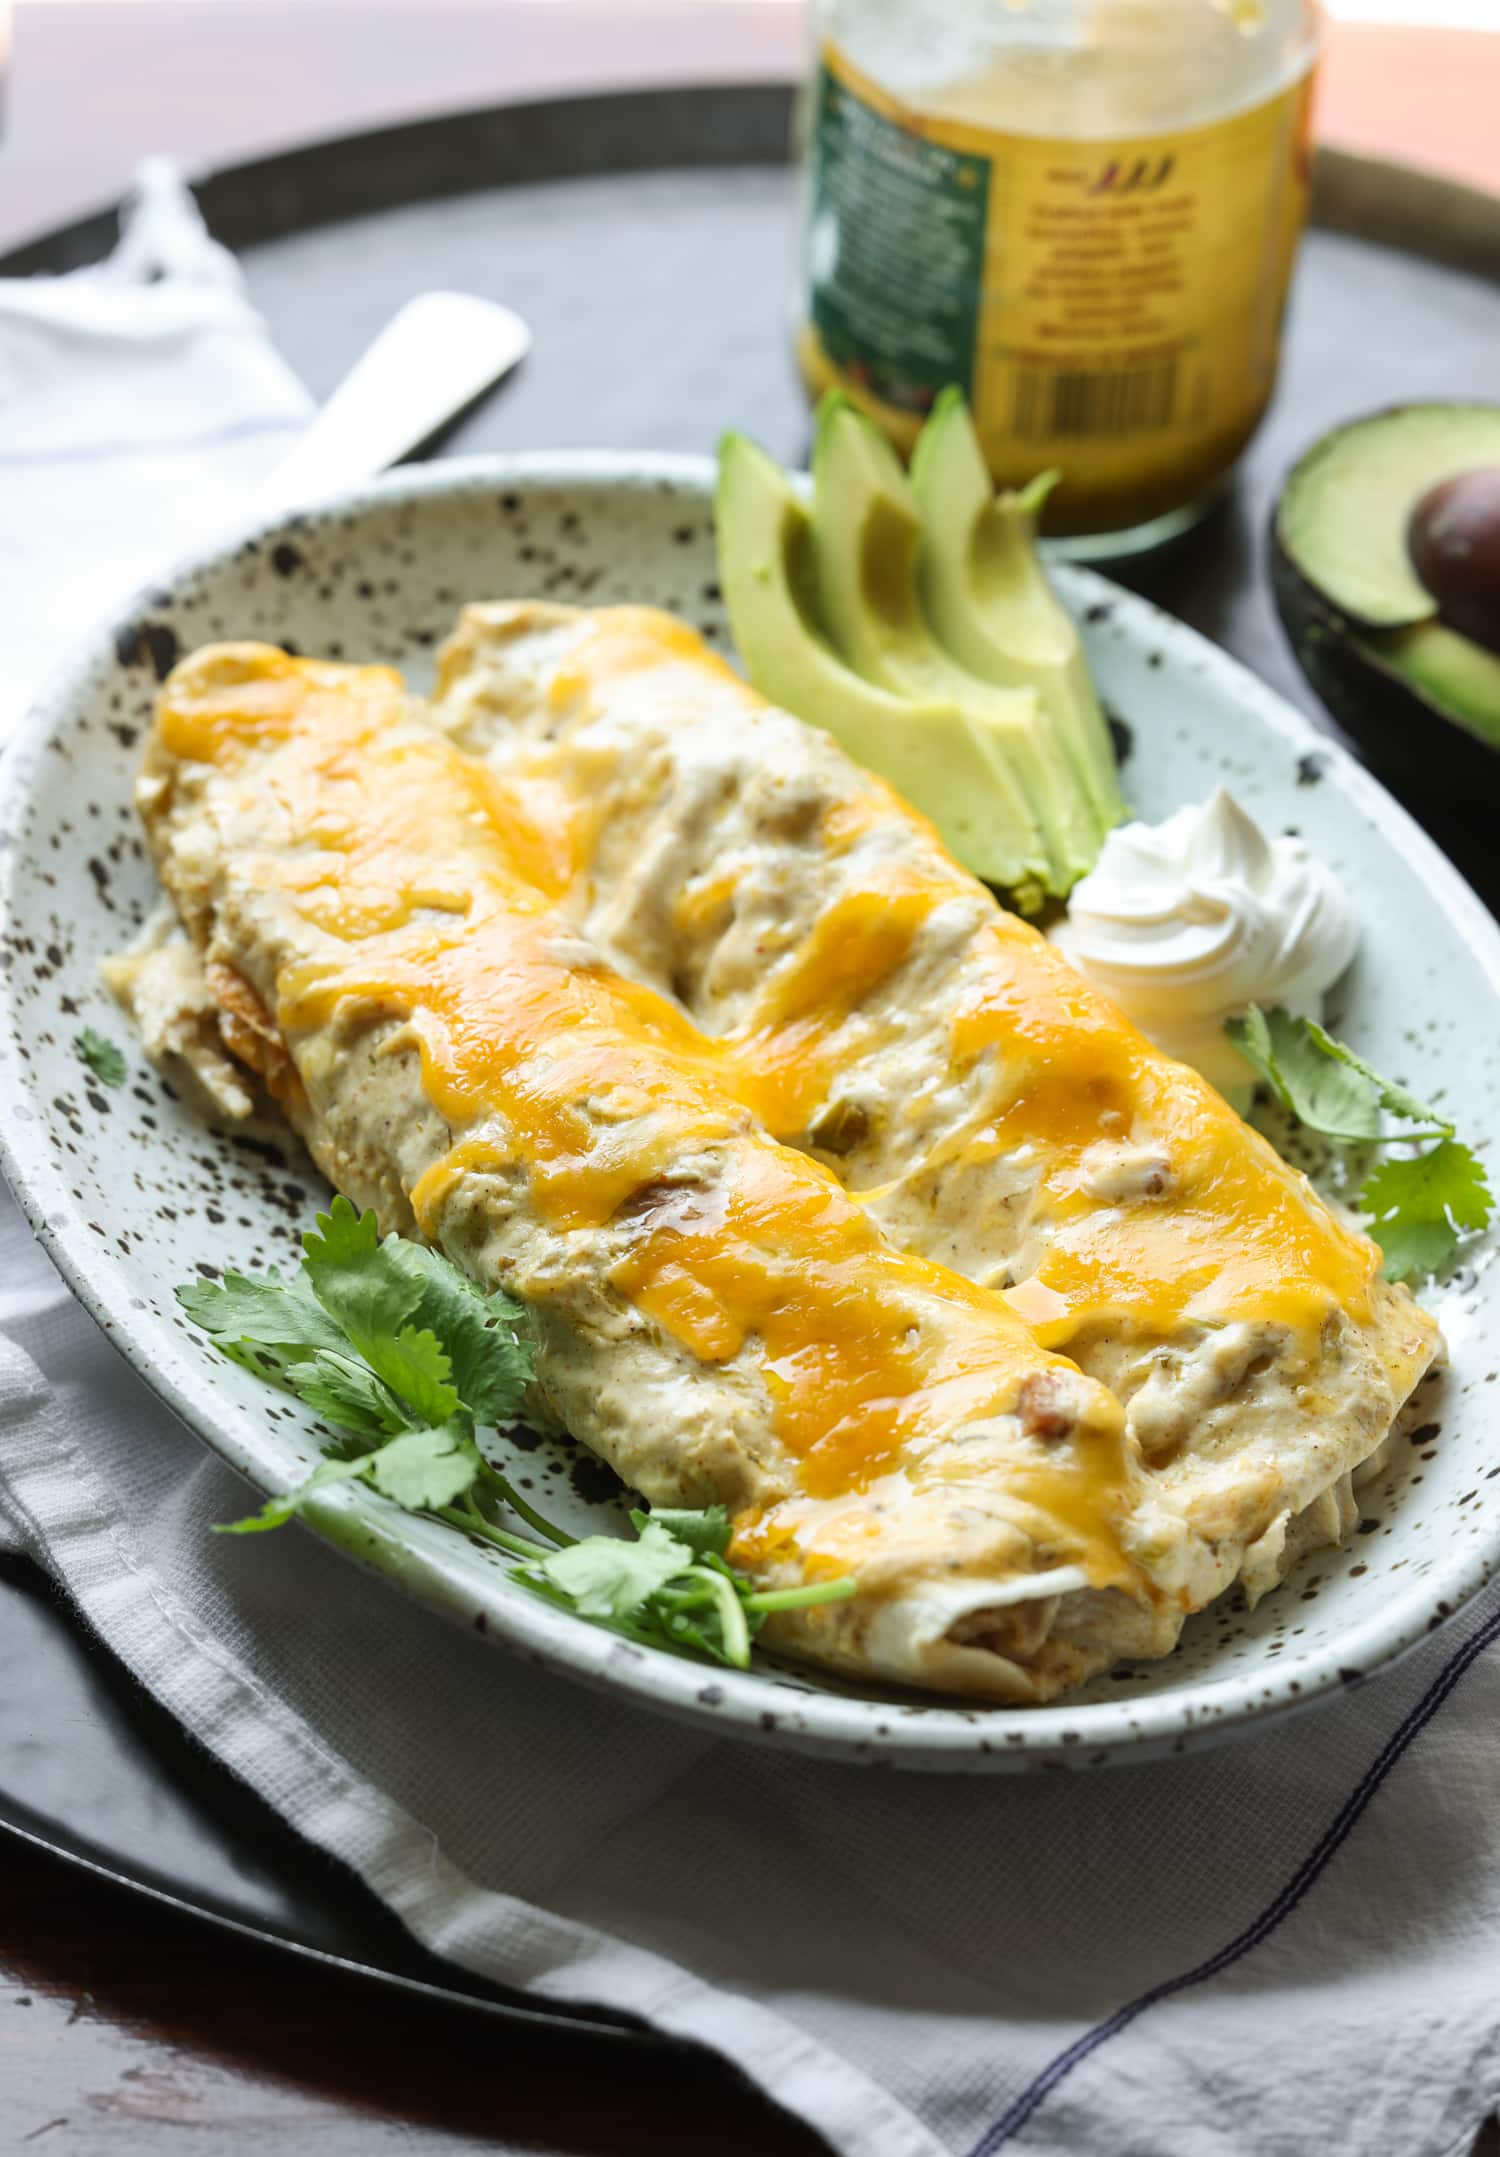 Chicken enchiladas served on a plate covered in melted cheese with avocado slices